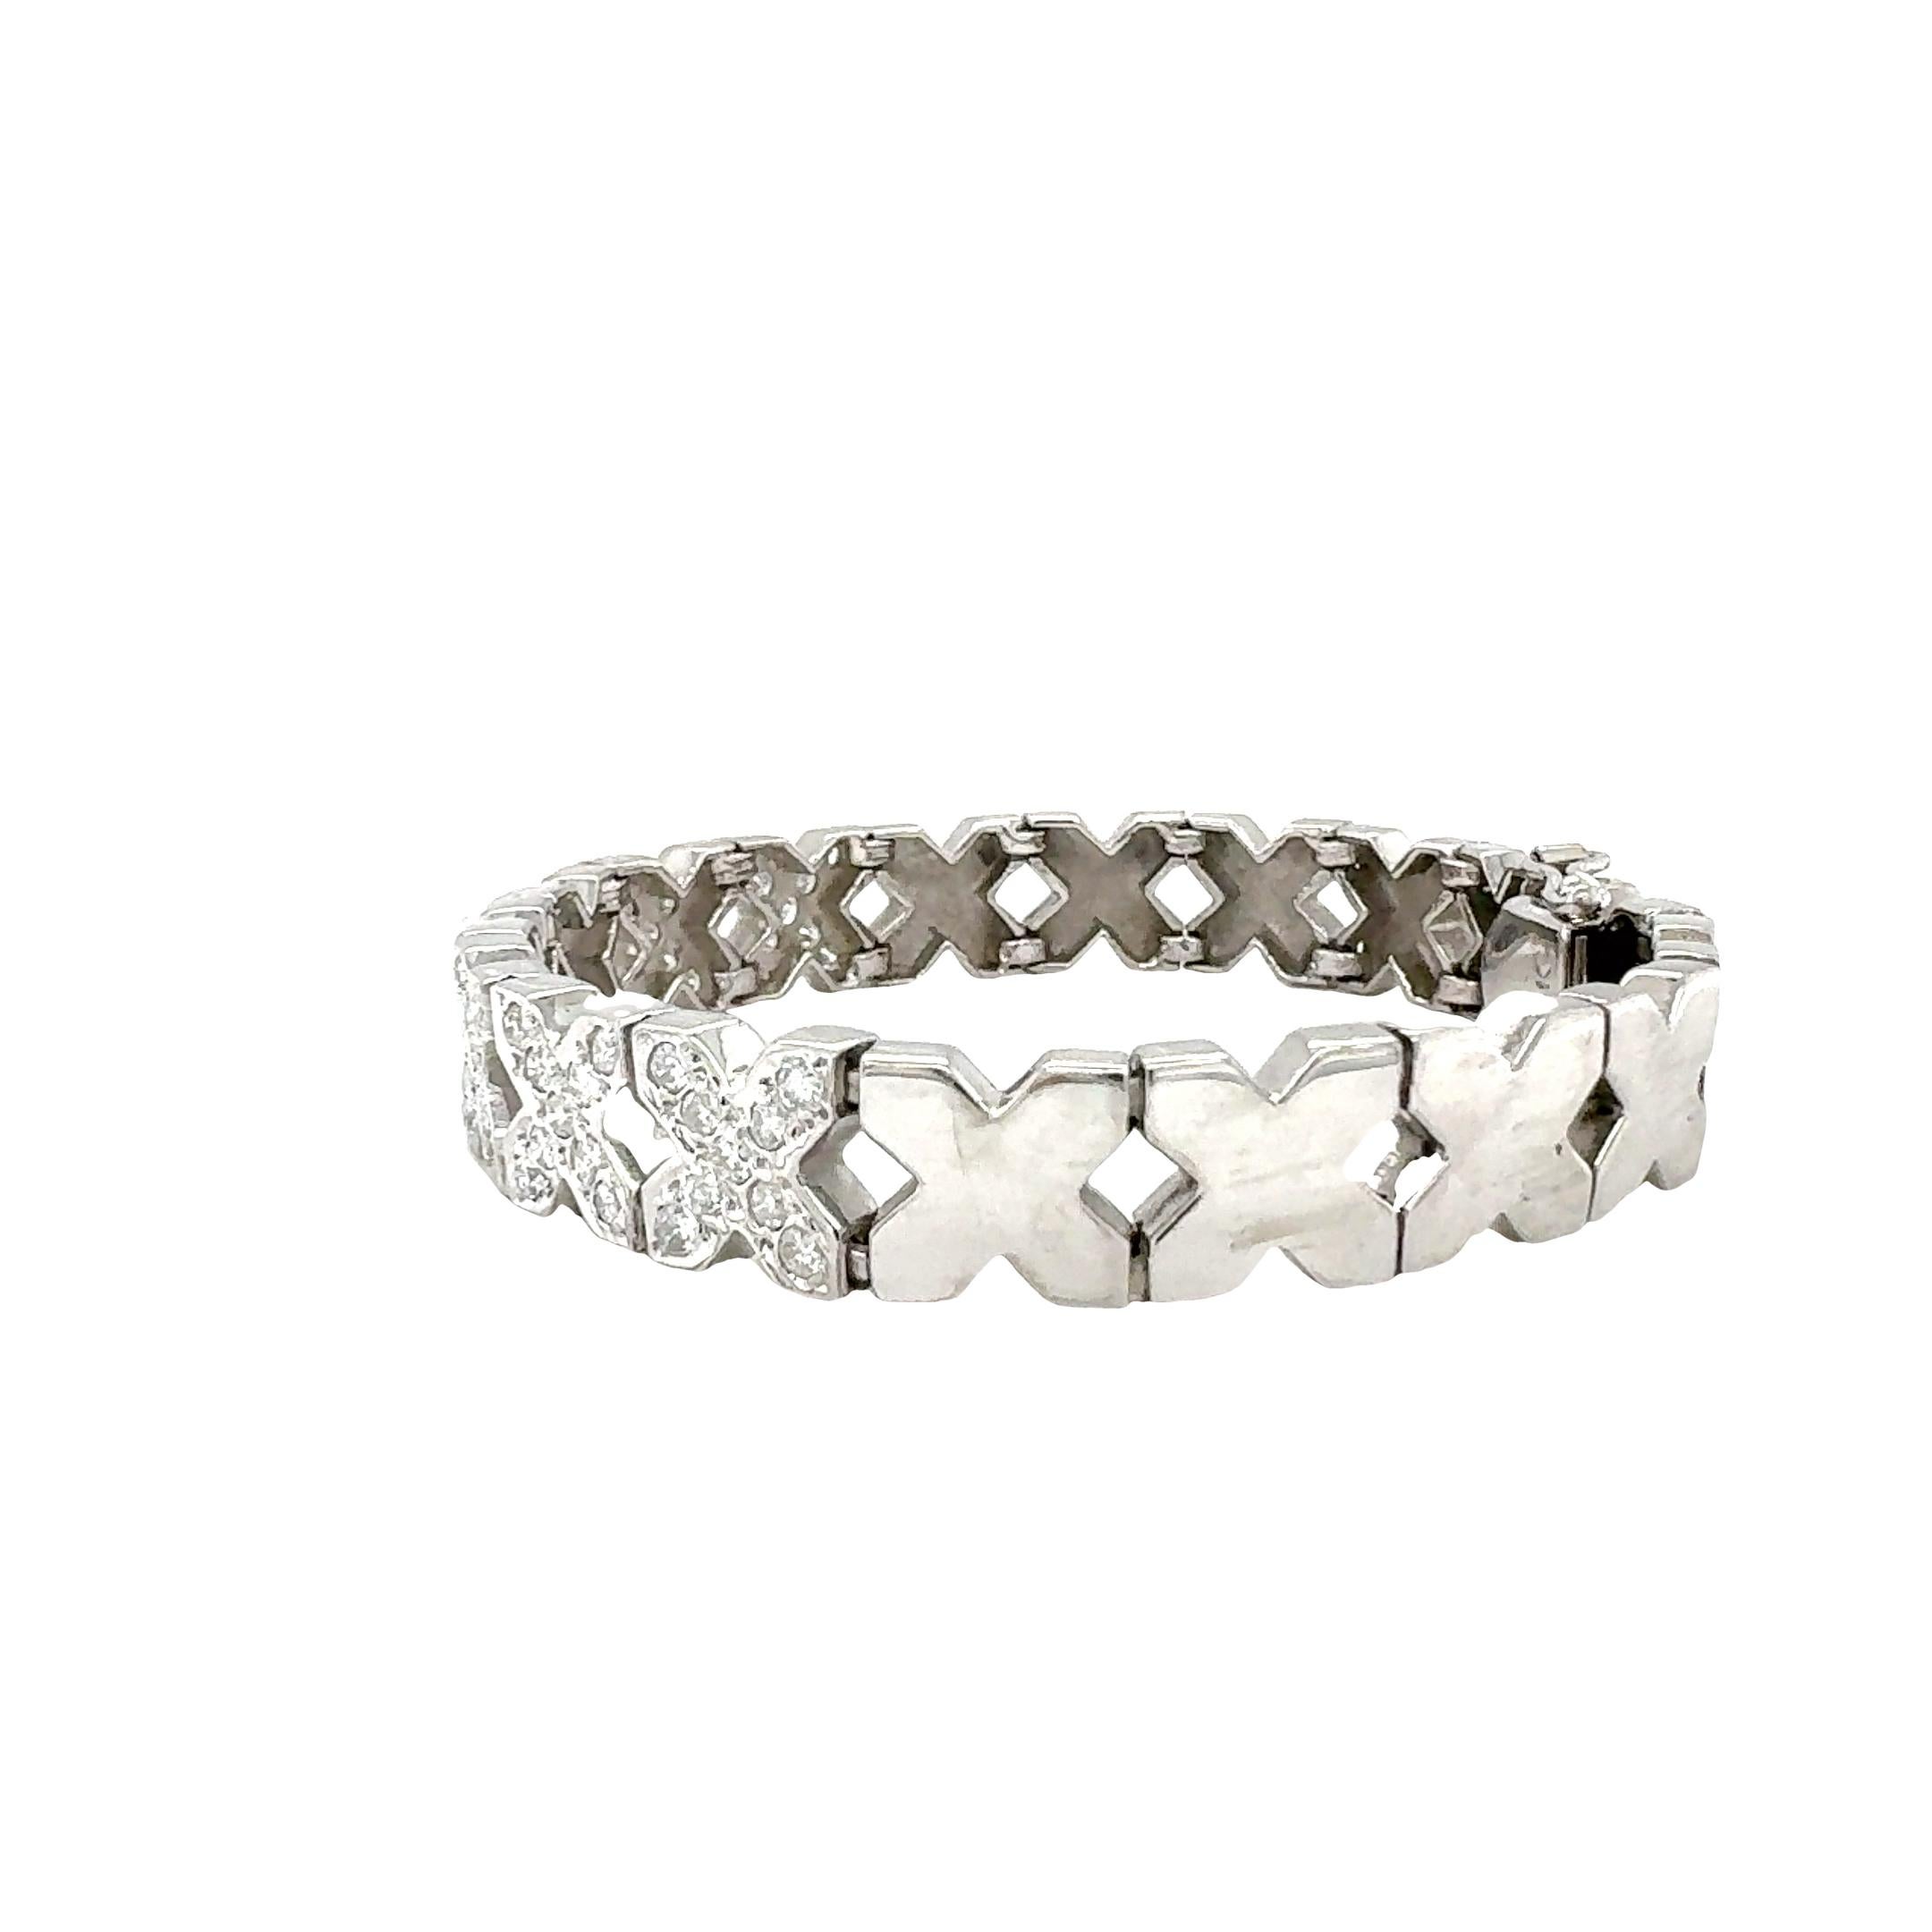 One 14K white gold diamond pave-set ‘X’ link bracelet featuring 63 pave set, round brilliant cut diamonds weighing 1 ct. in total with H-I color and SI-1, SI-2 clarity. Part of set with NO.EB.2 and EO.EB.14.

Metal: 14K White Gold
Gemstone: Diamonds